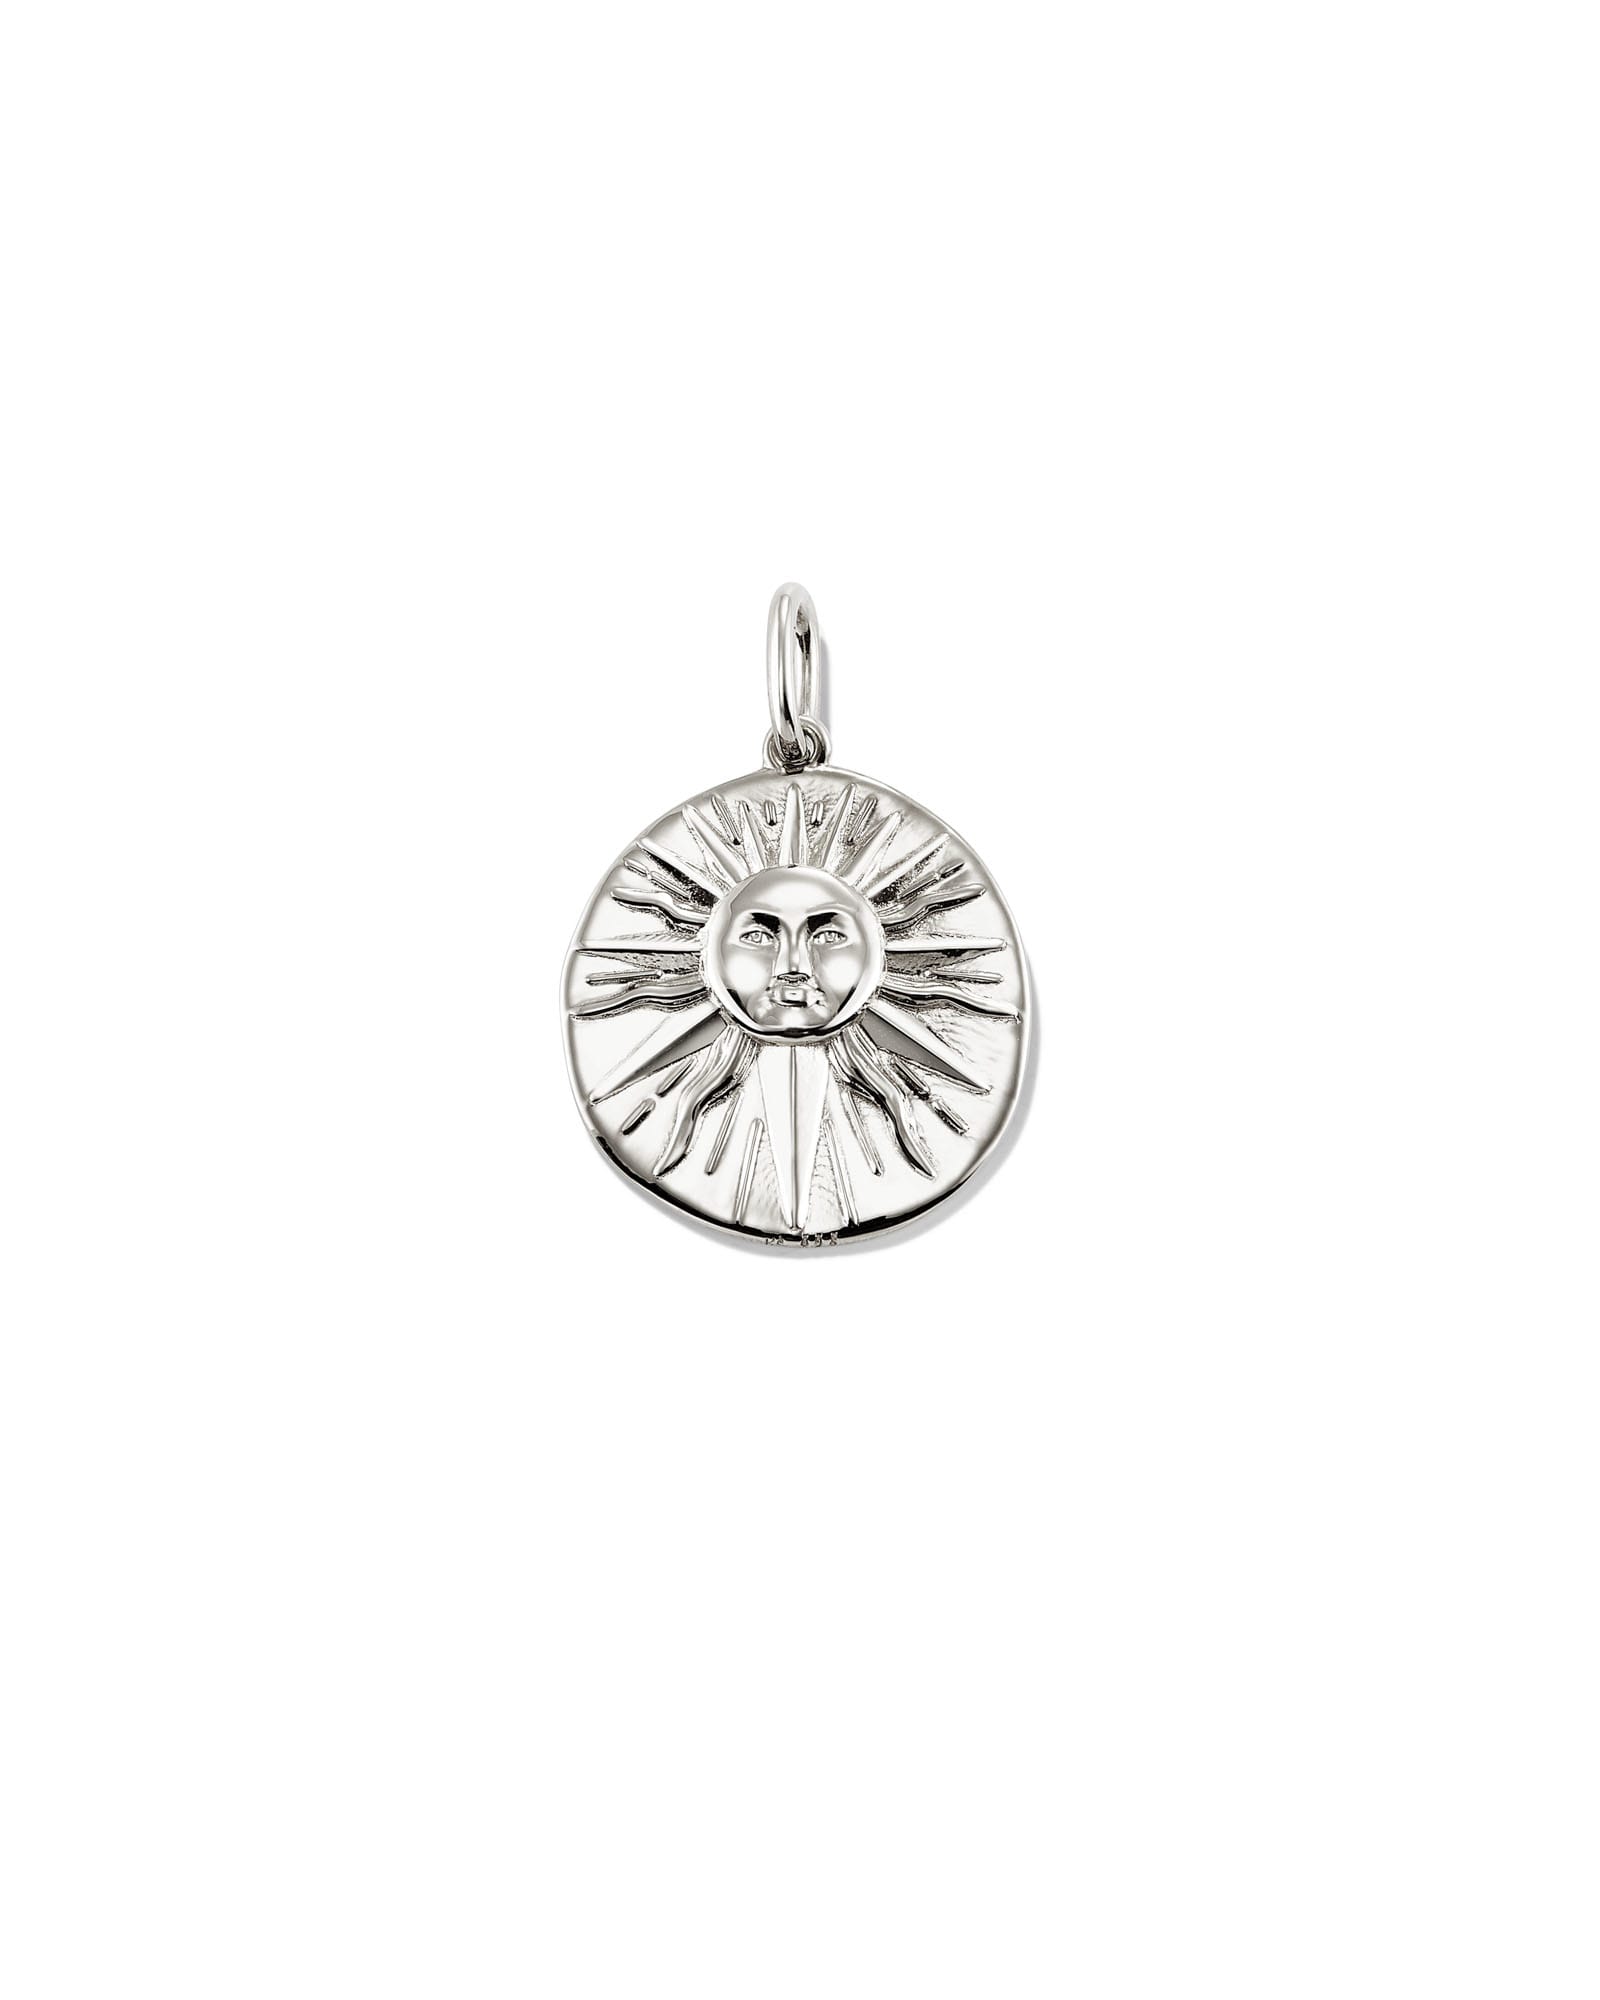 Sun Coin Charm in Sterling Silver